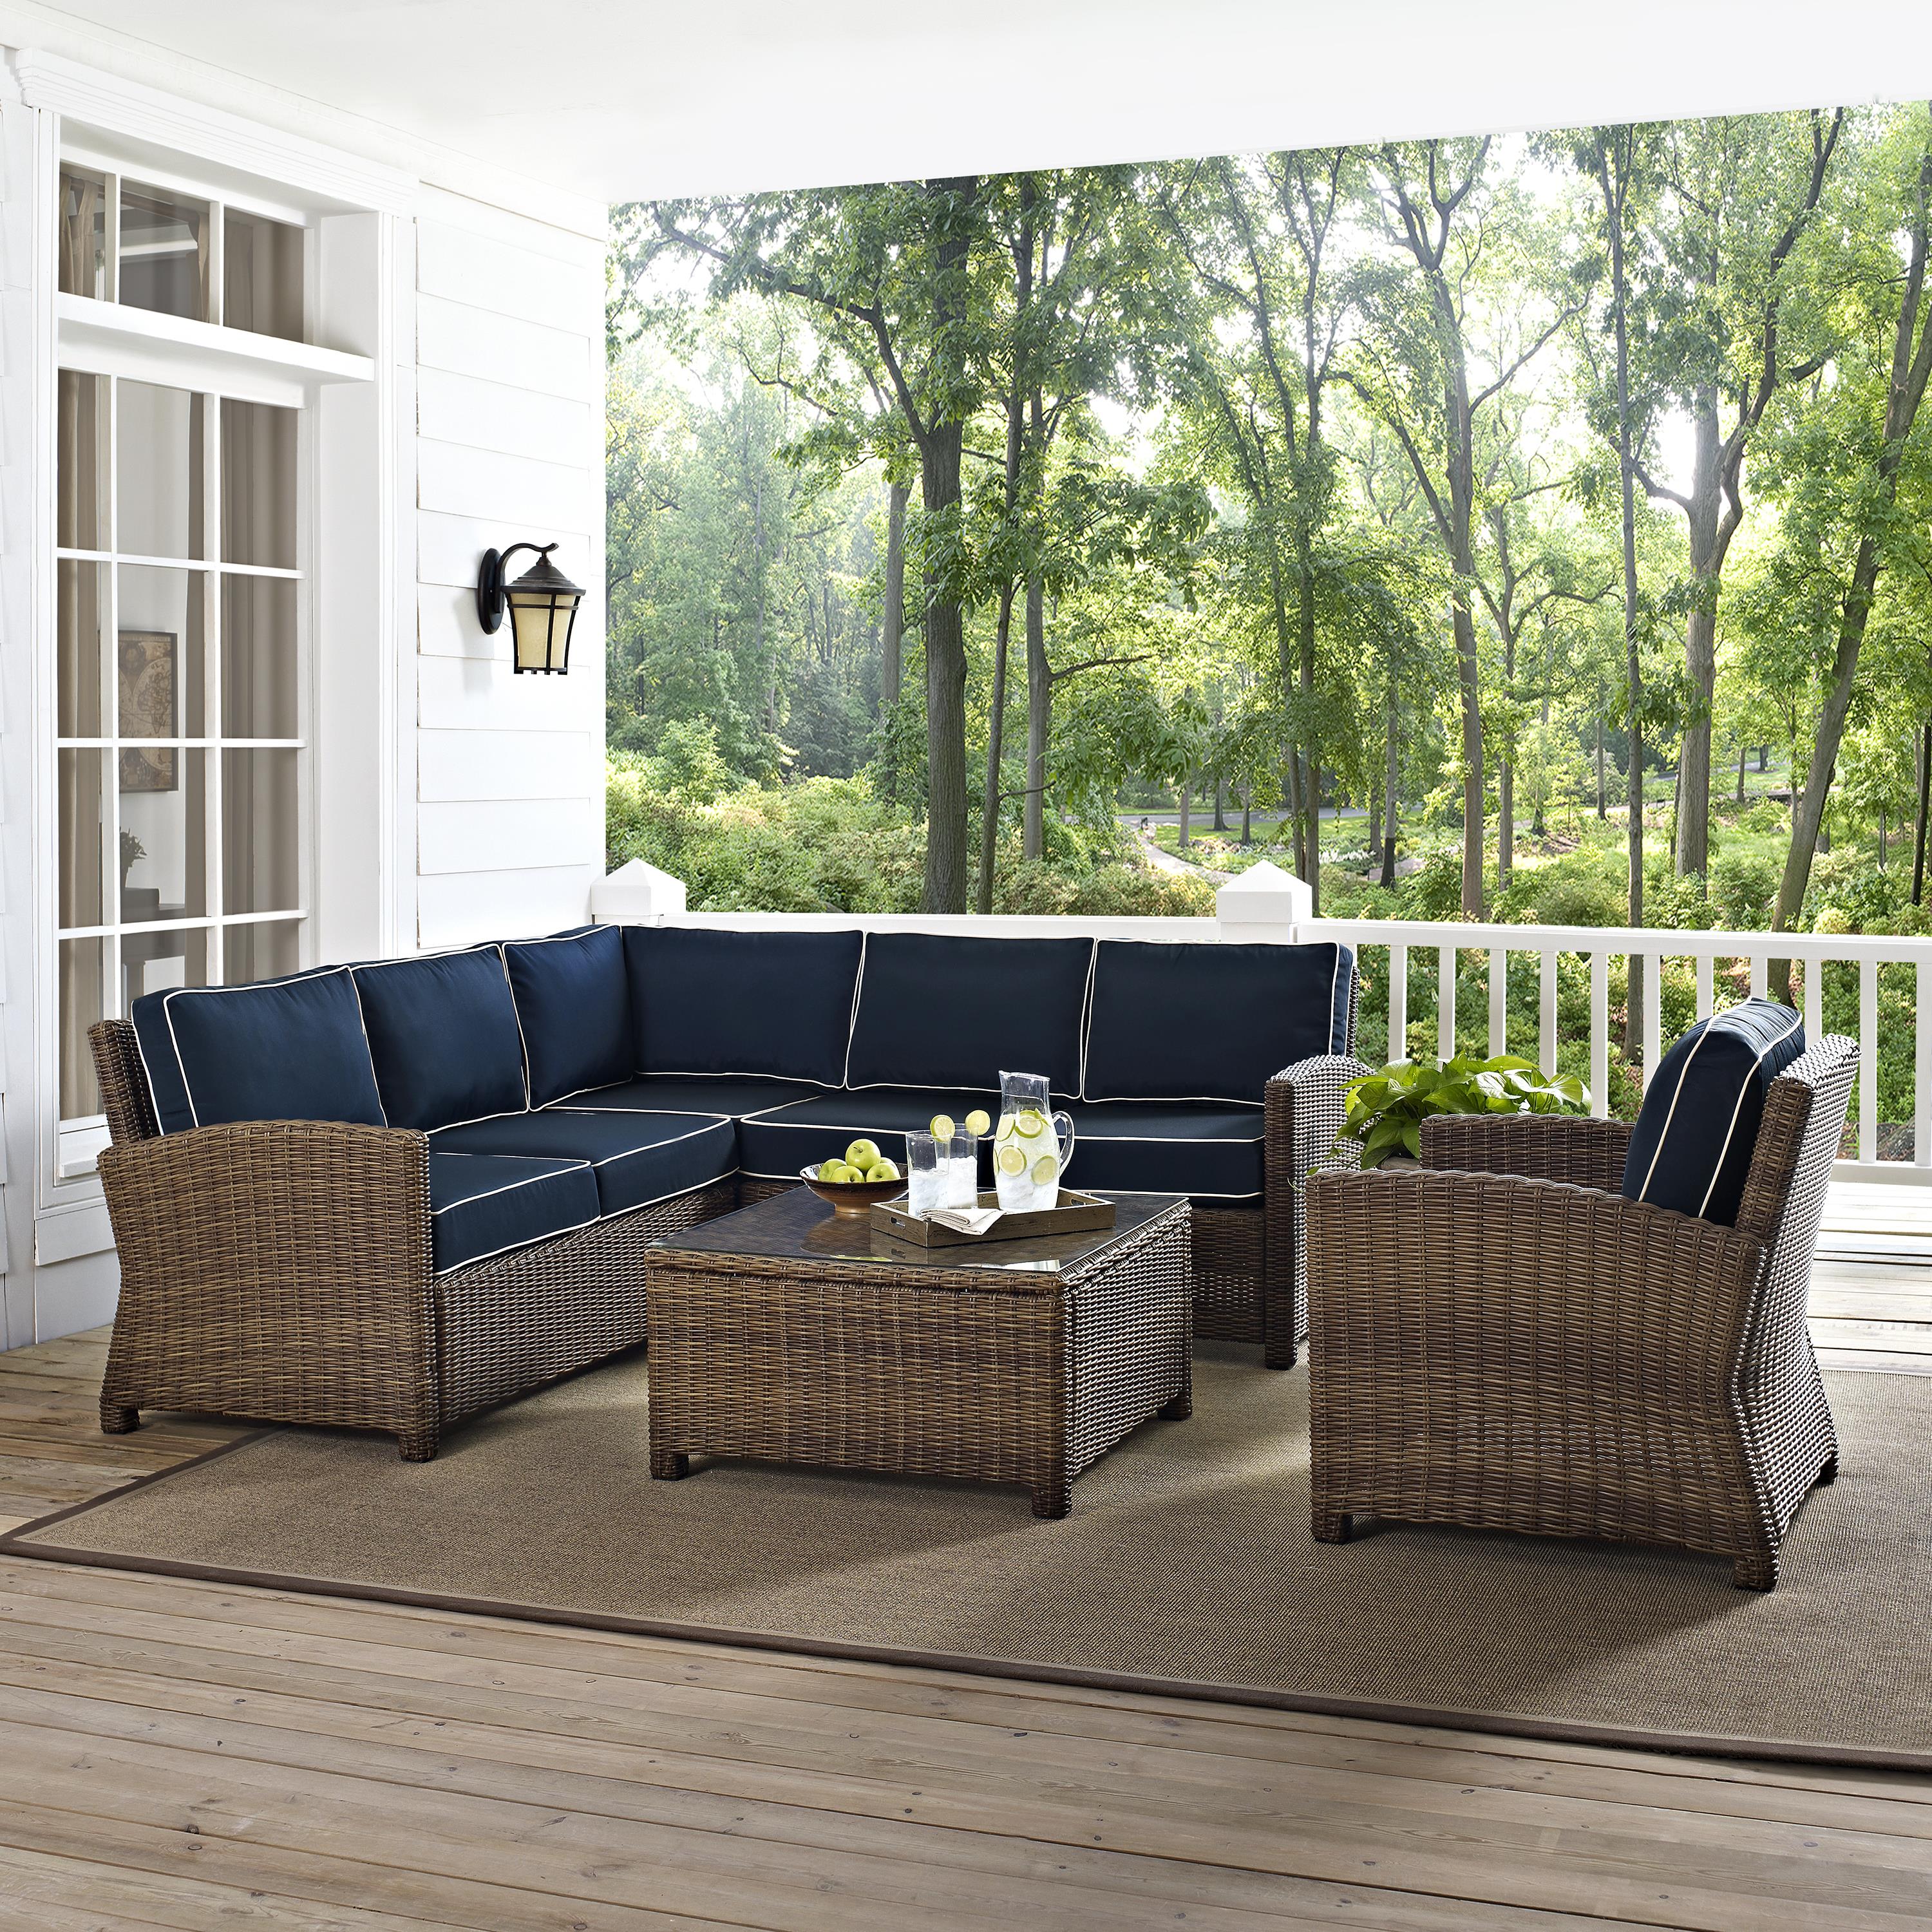 Crosley Furniture Bradenton 5 Pc Fabric Patio Sectional Set in Brown and Navy - image 2 of 10